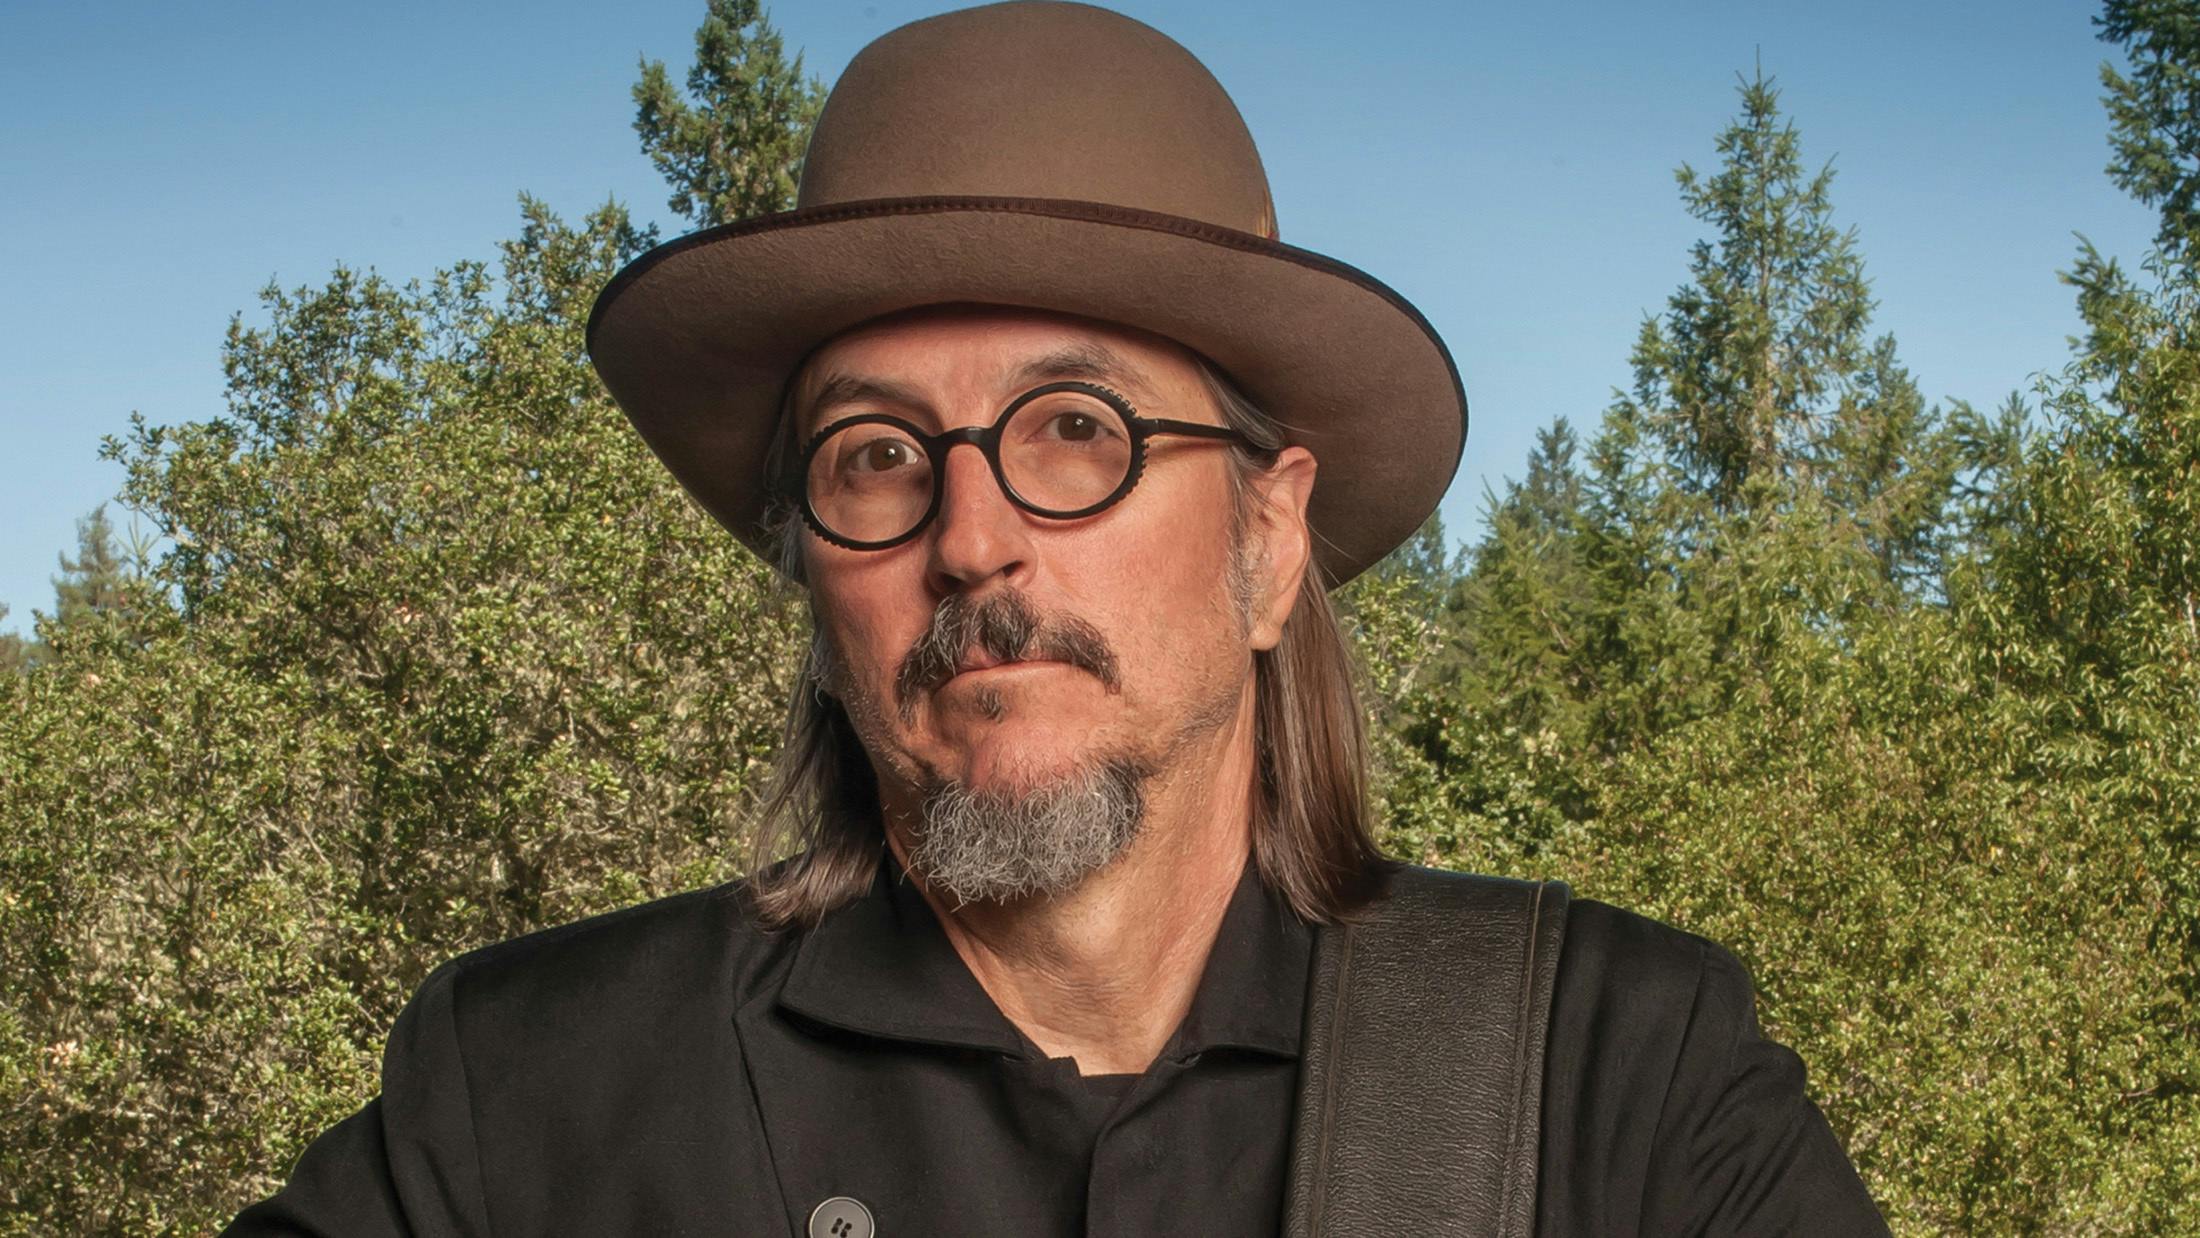 Primus' Les Claypool: "My daughter tells me I'm weird all the time"